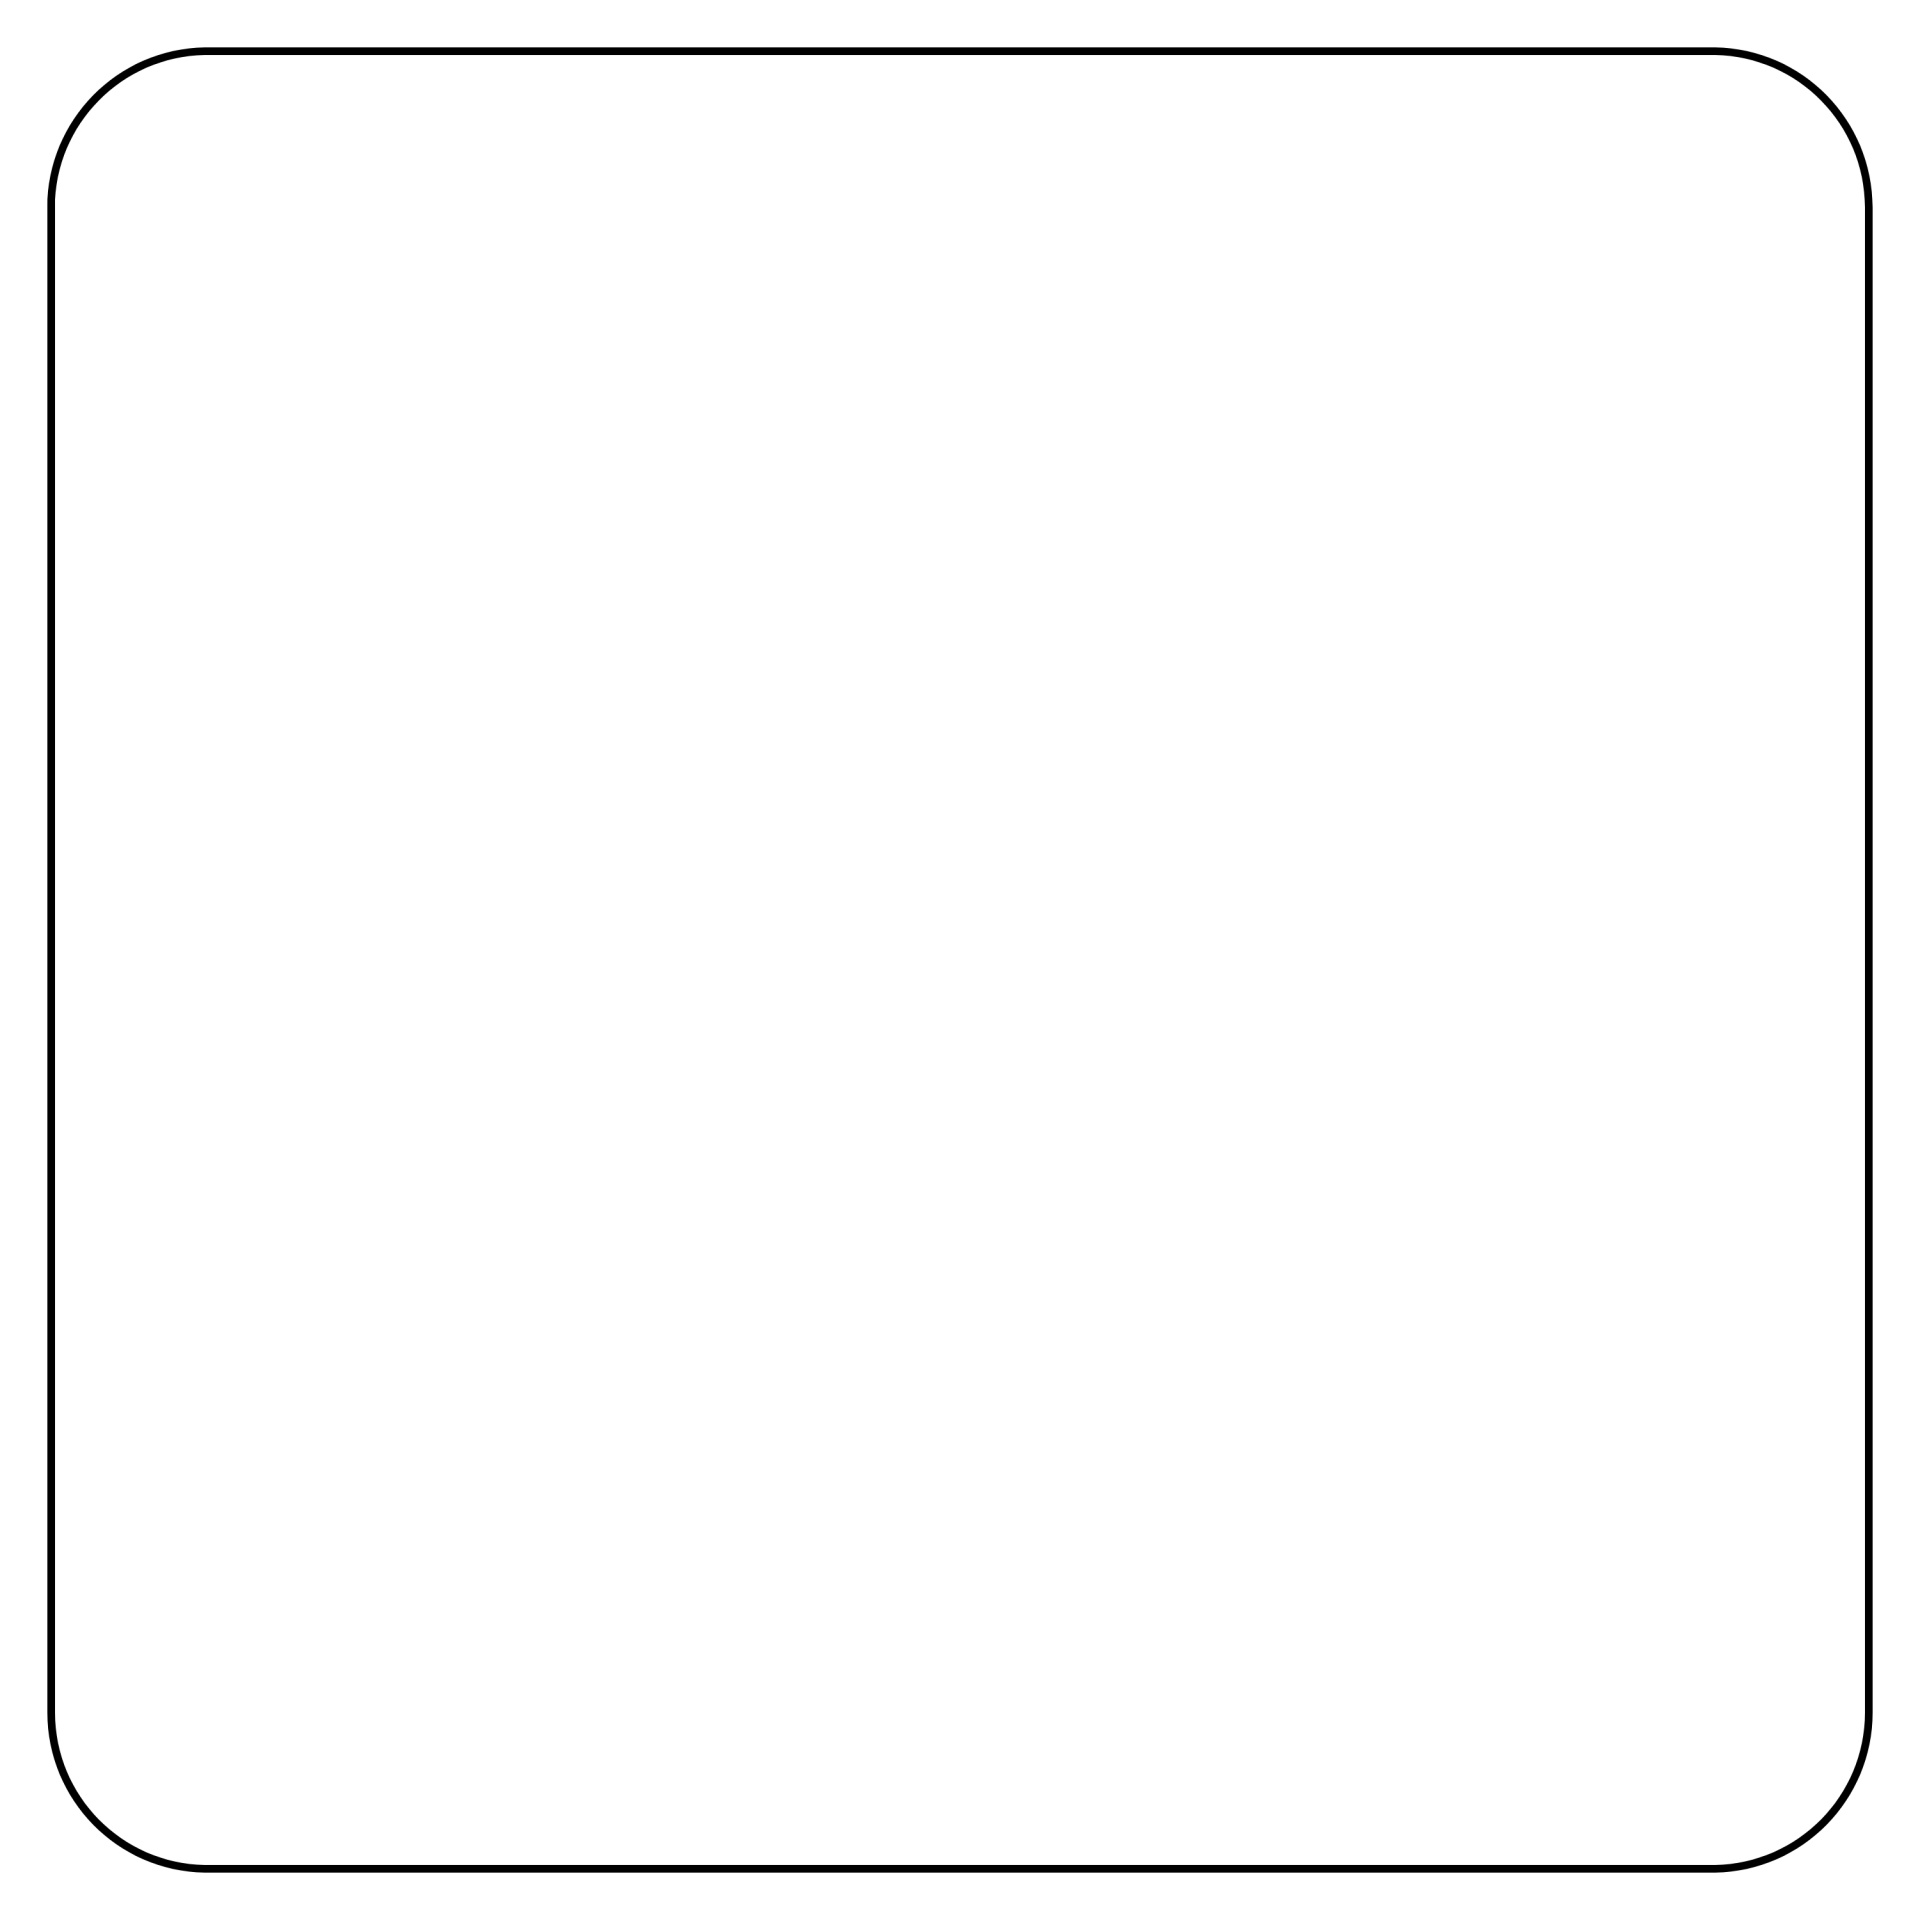 Background with frame corners rounded monochrome